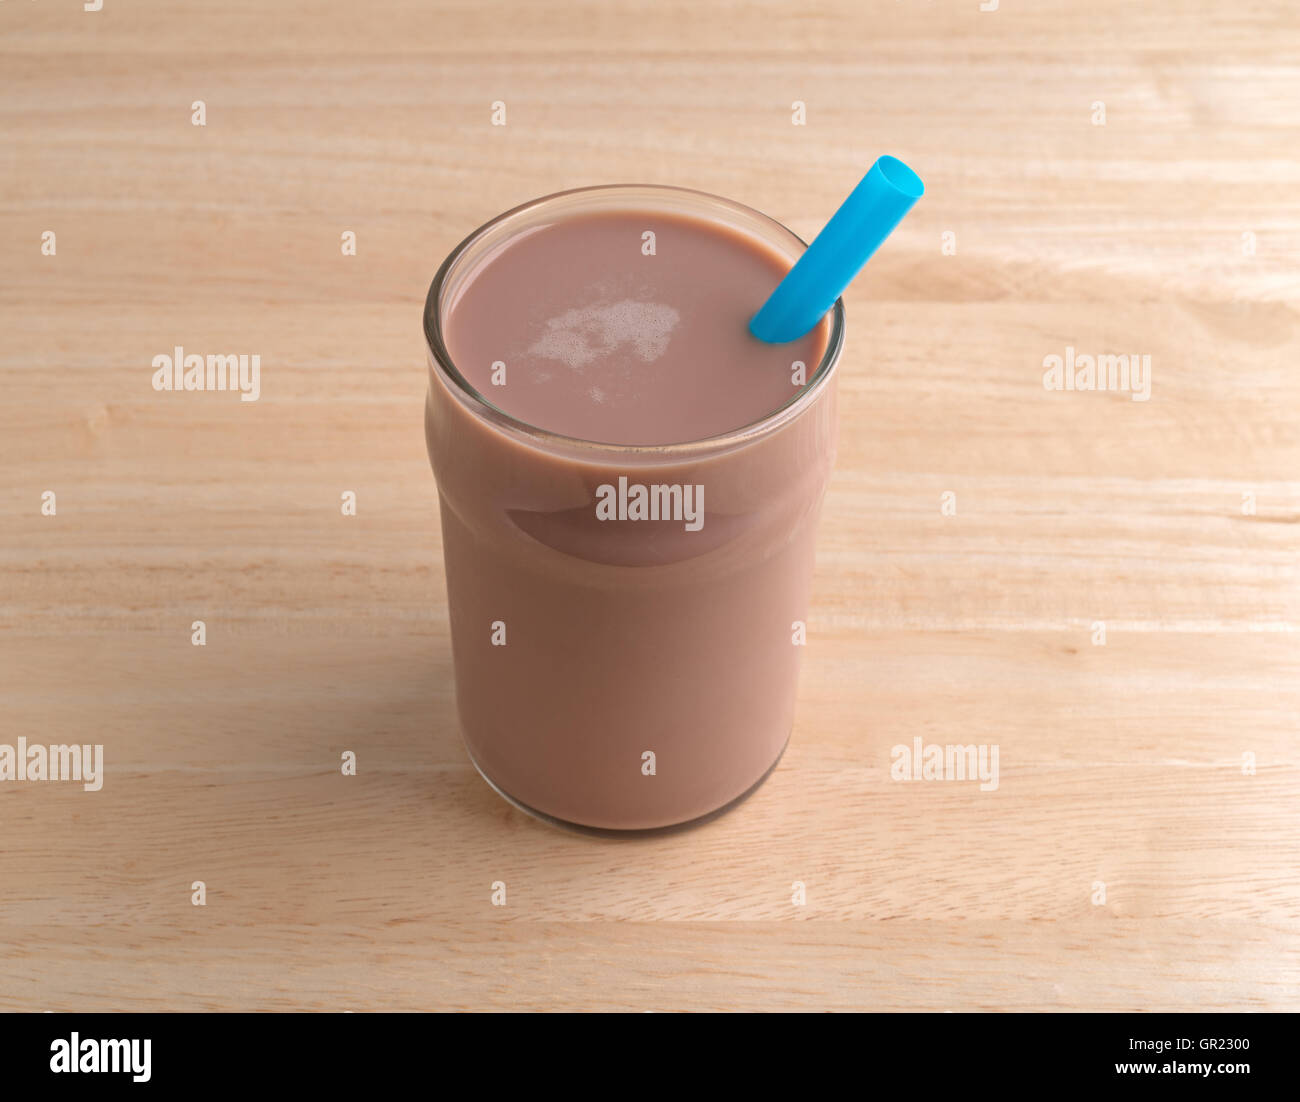 A glass of chocolate milk with a straw on a wood table. Stock Photo